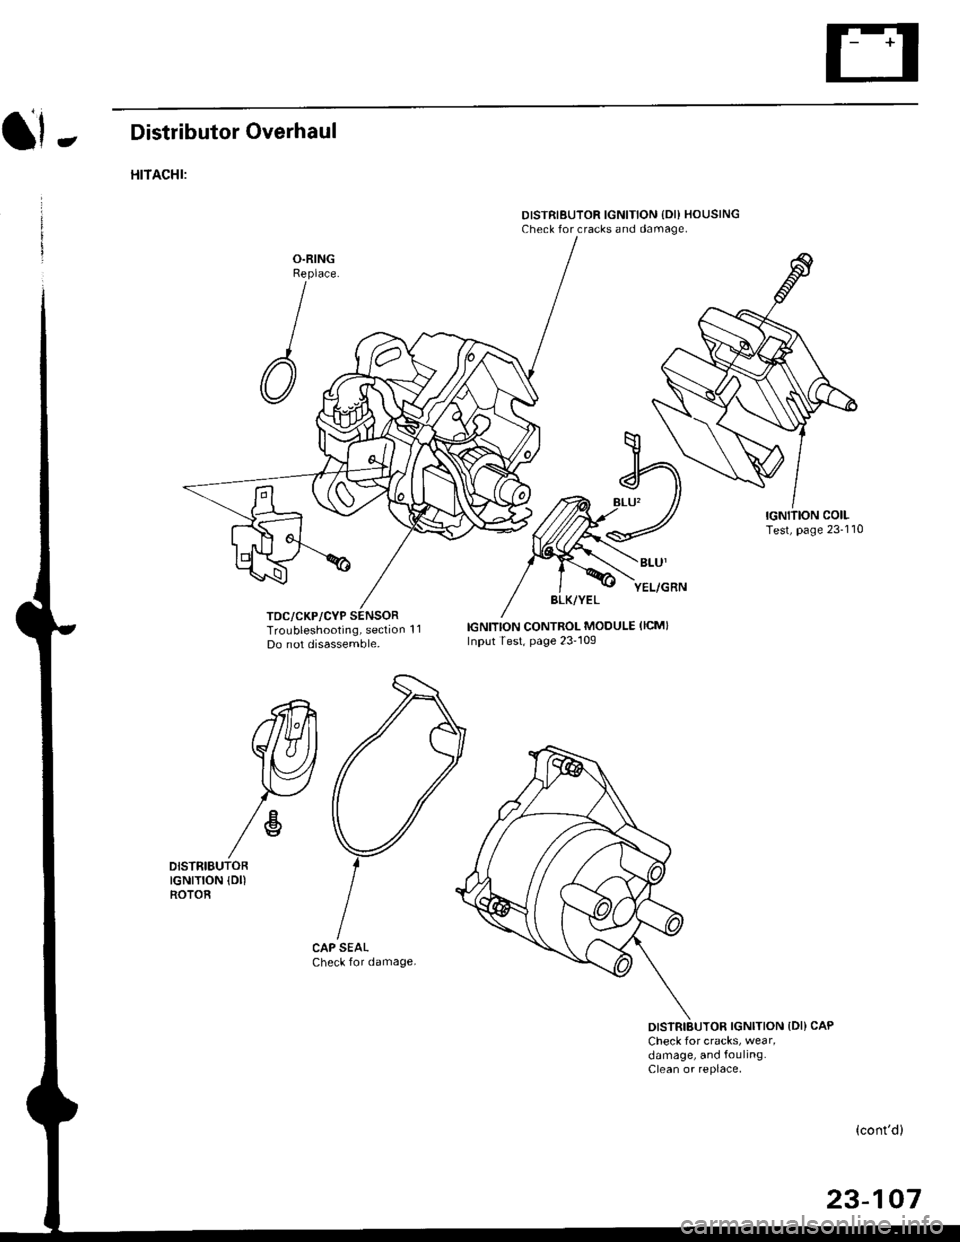 HONDA CIVIC 1997 6.G Owners Manual el -Distributor Overhaul
HITACHI:
TOC/CKP/CYP
DISTRIBUTOR IGNITION {DI} HOUSINGCheck for cracks and damage.
Troubleshooting, section 1 1
Do not disassemble.
CAP SEALCheck for damage.
IGNITION CONTROL 